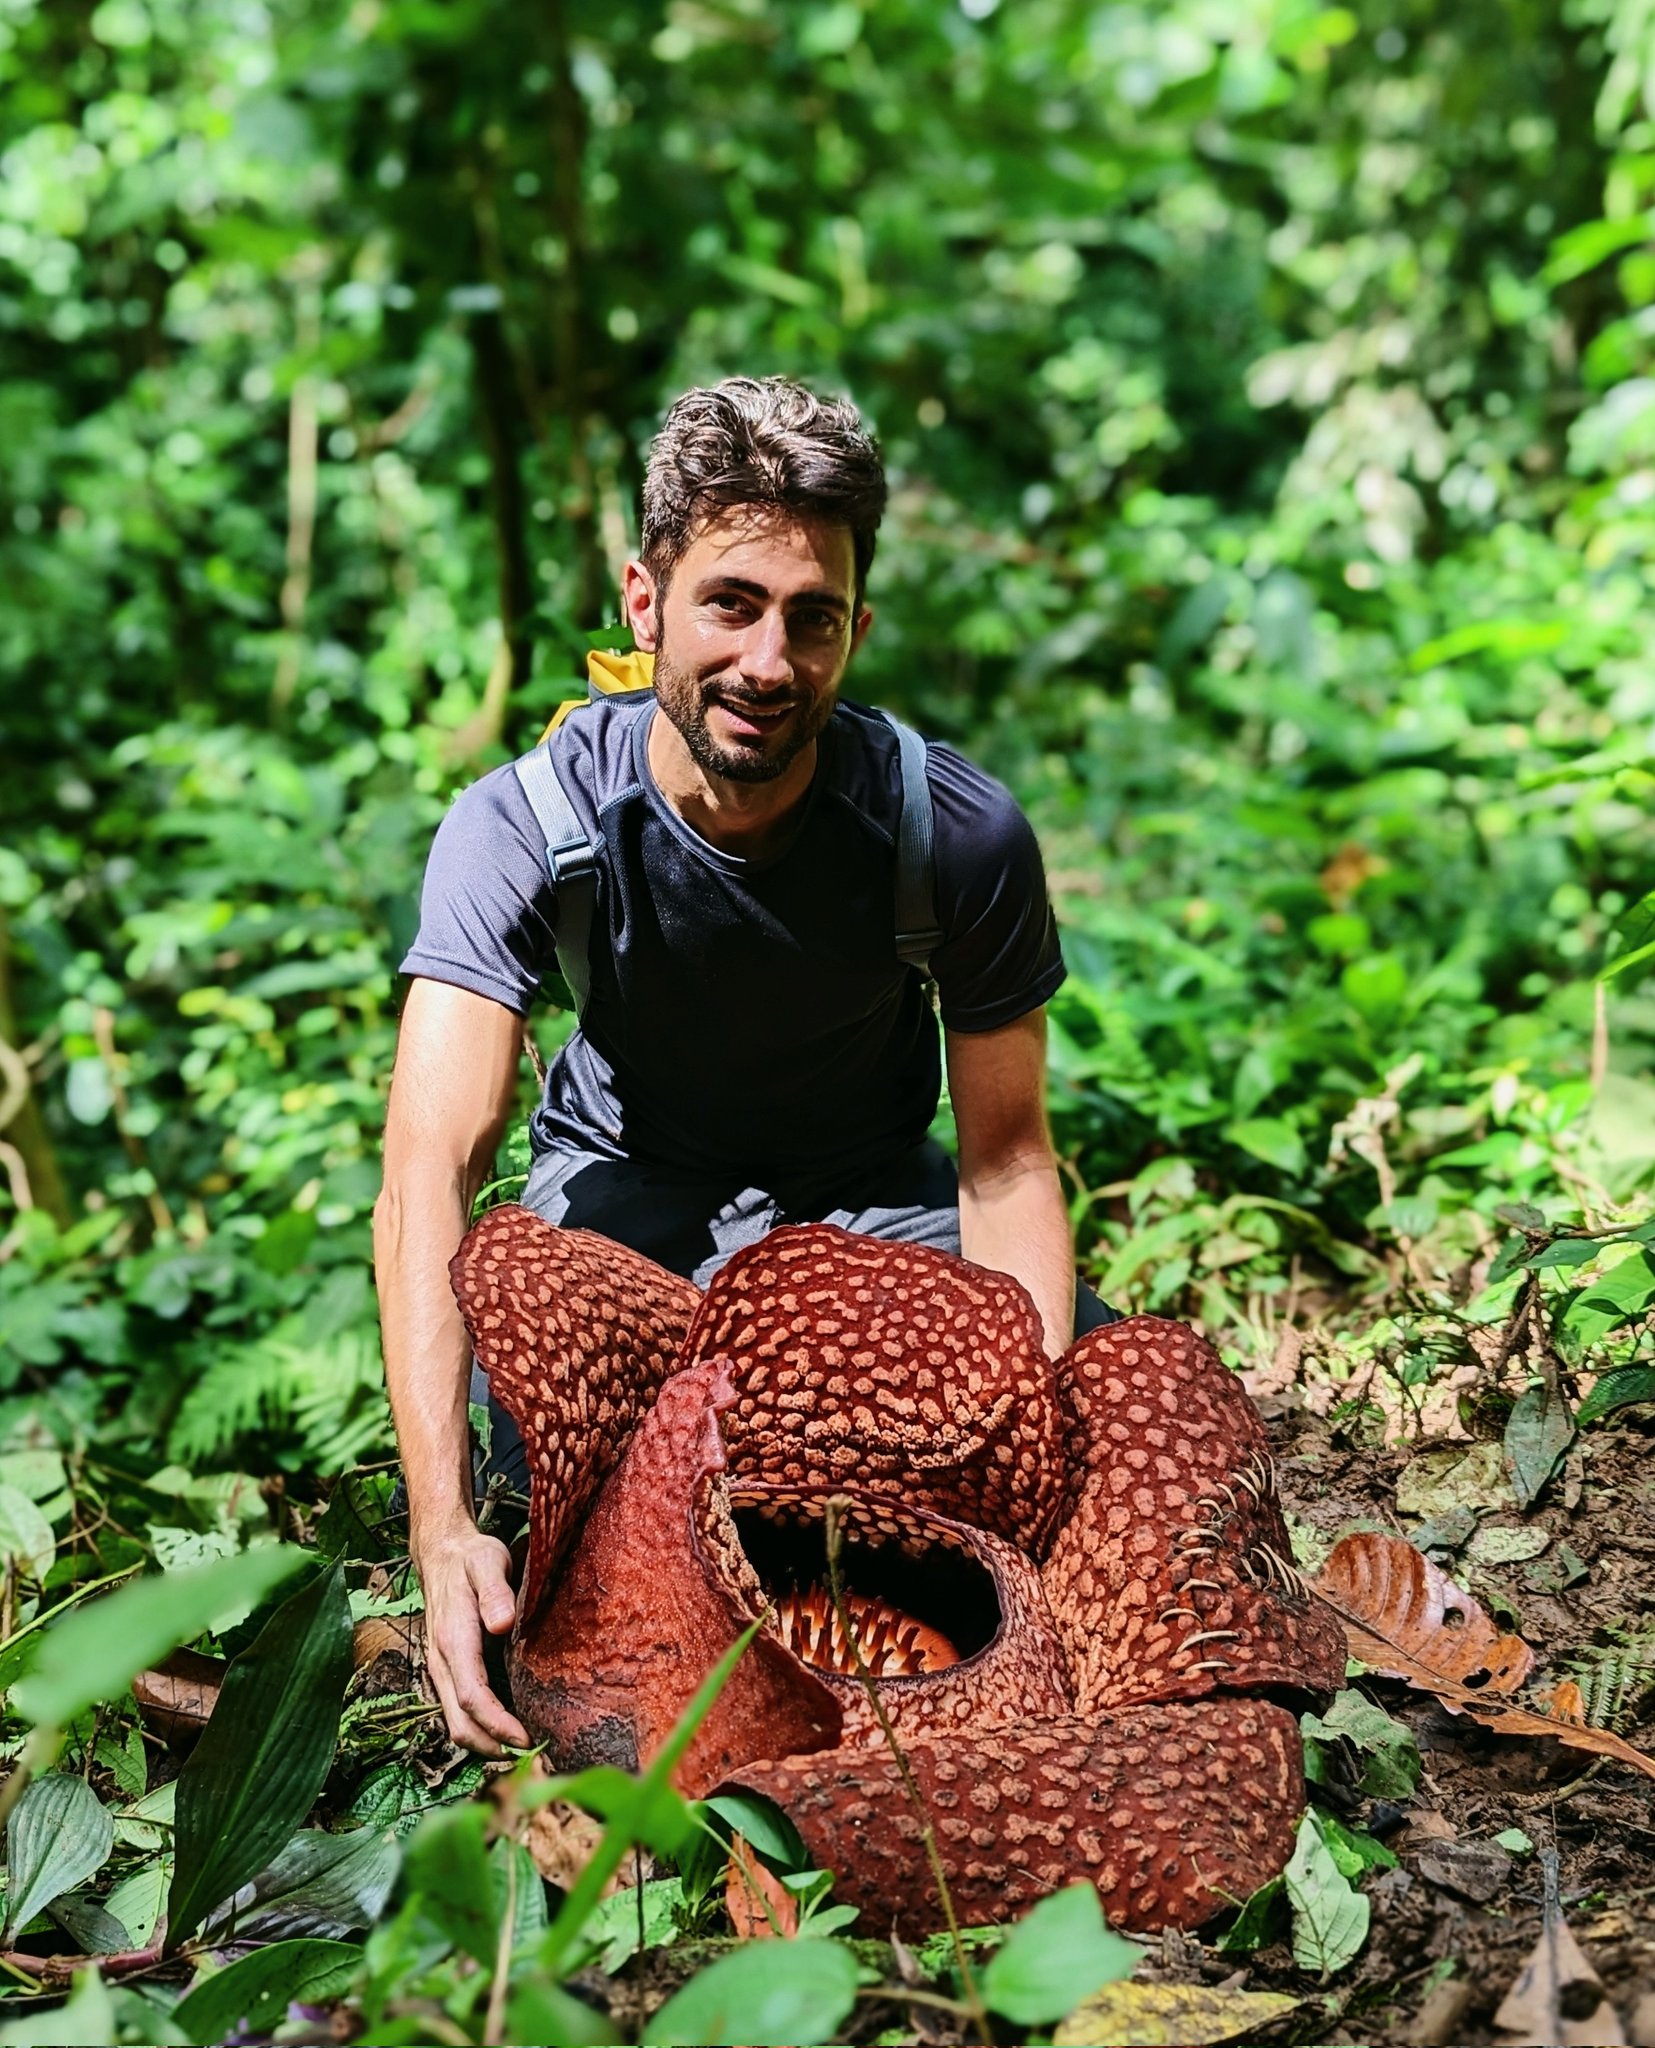 Chris Thorogood on Twitter: "And here is the flower that rules them all: Rafflesia arnoldii. Of the 41 Rafflesia species that grow across SE Asia, this one in the depths of the